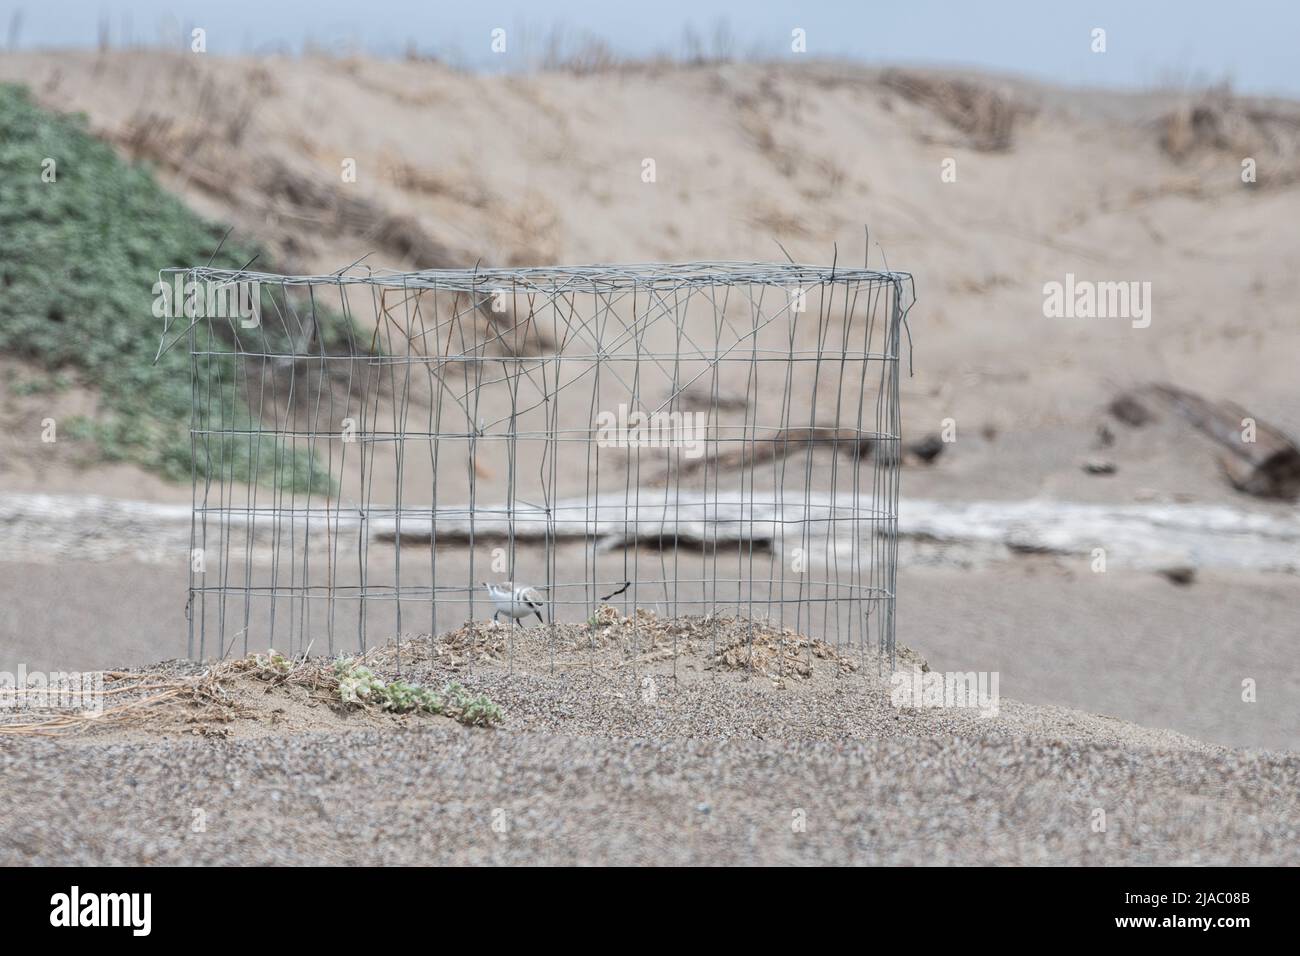 A nesting western snowy plover (Charadrius nivosus) encircled by a wire nest exclusion fence which keeps predators away from the eggs. Stock Photo